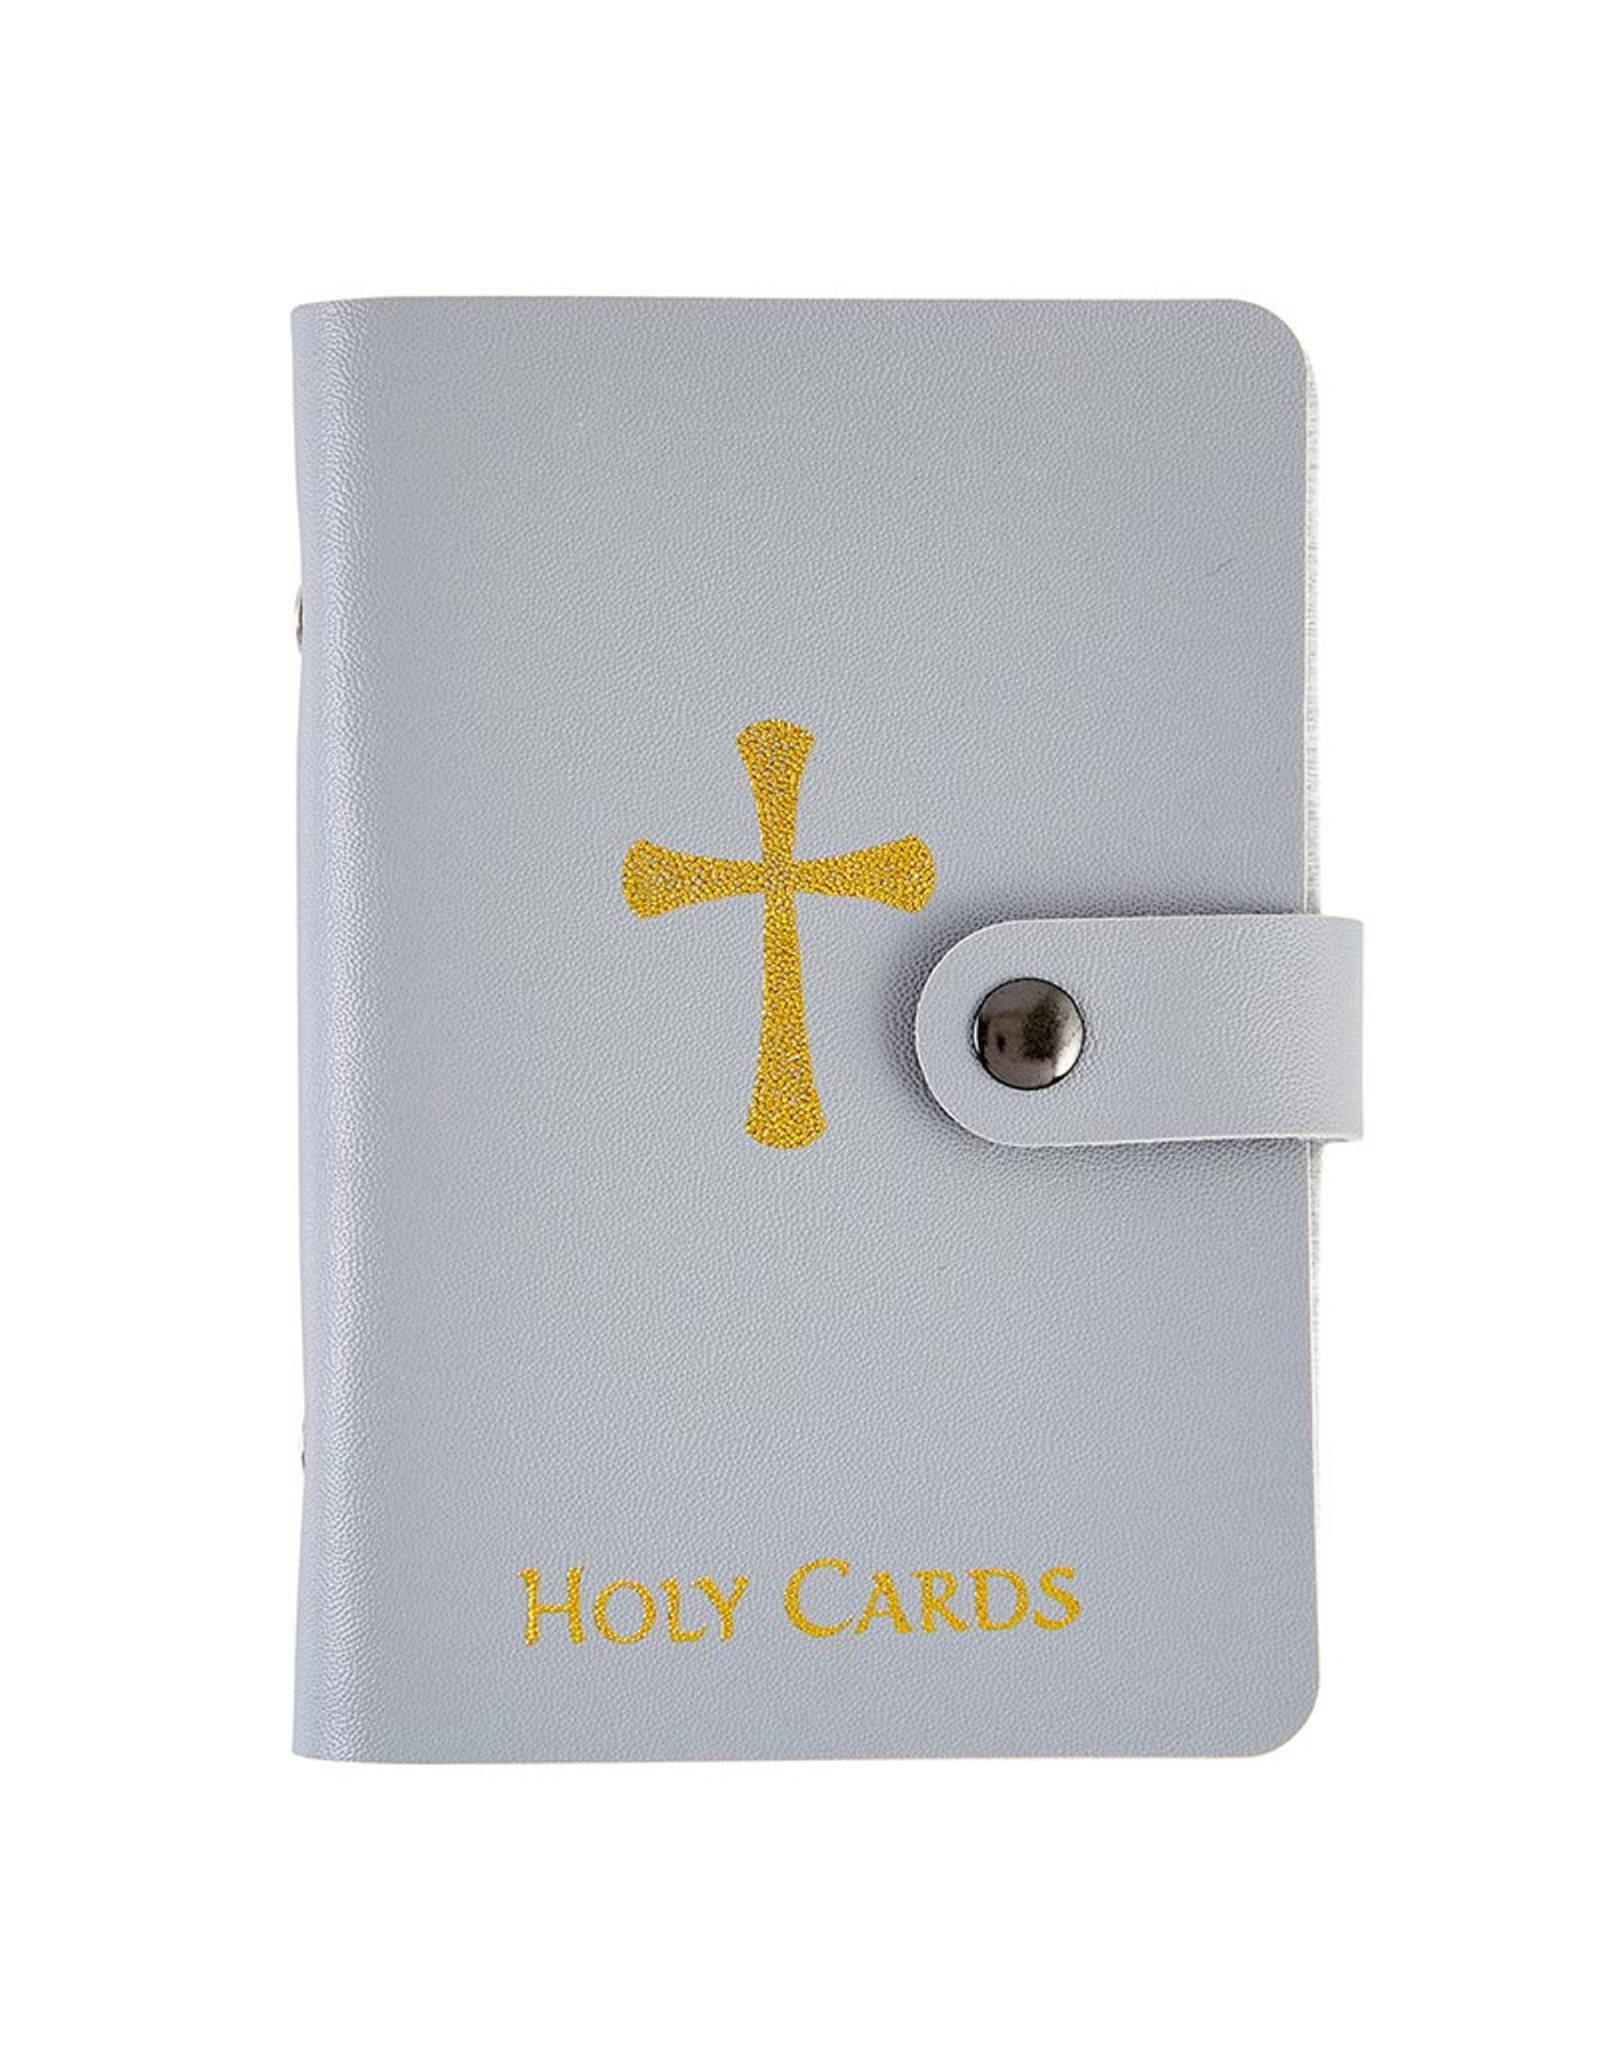 CBC - A Holy Cards Booklet - Gray